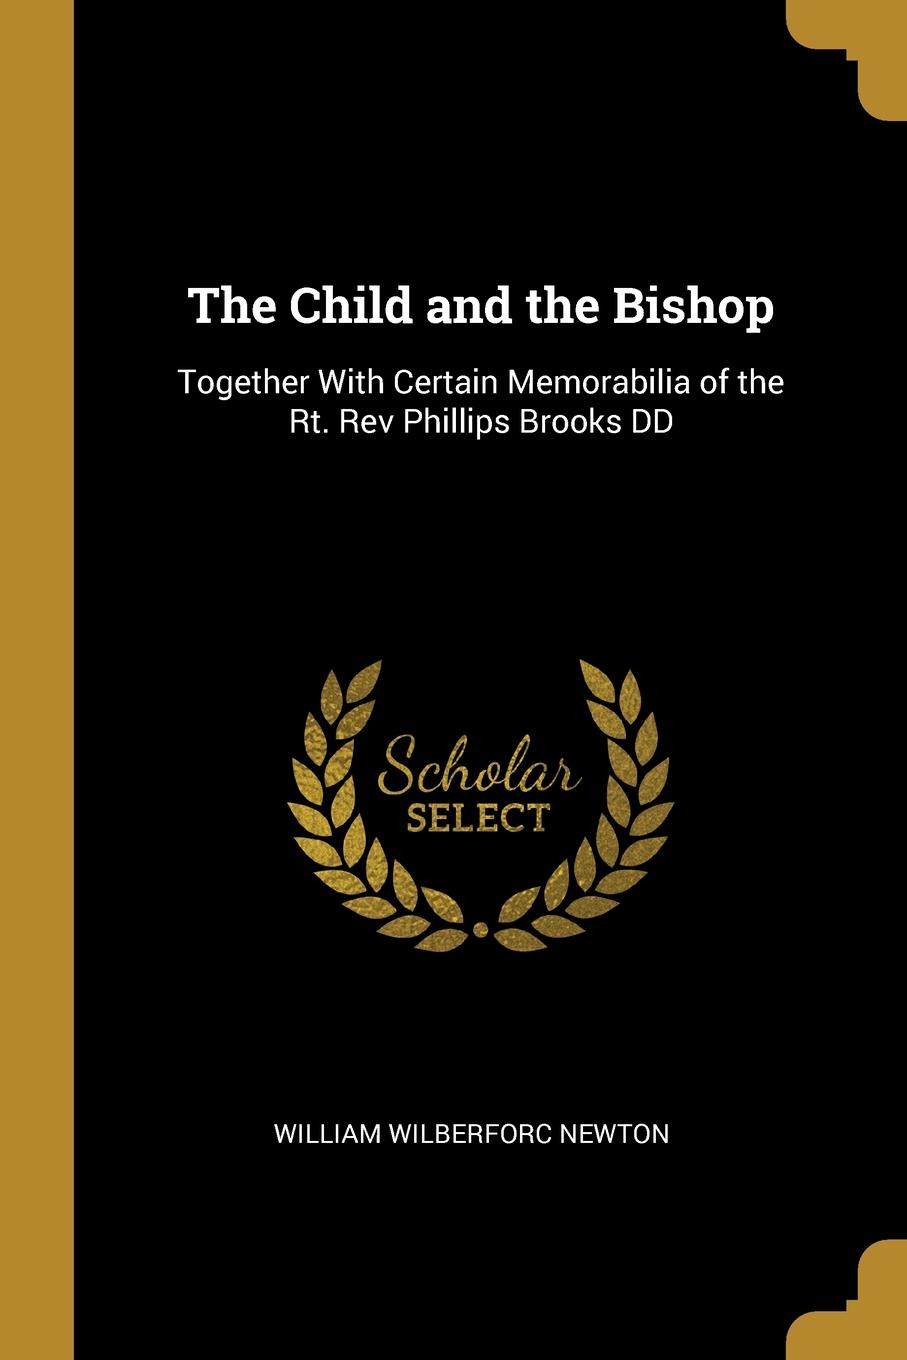 фото The Child and the Bishop. Together With Certain Memorabilia of the Rt. Rev Phillips Brooks DD